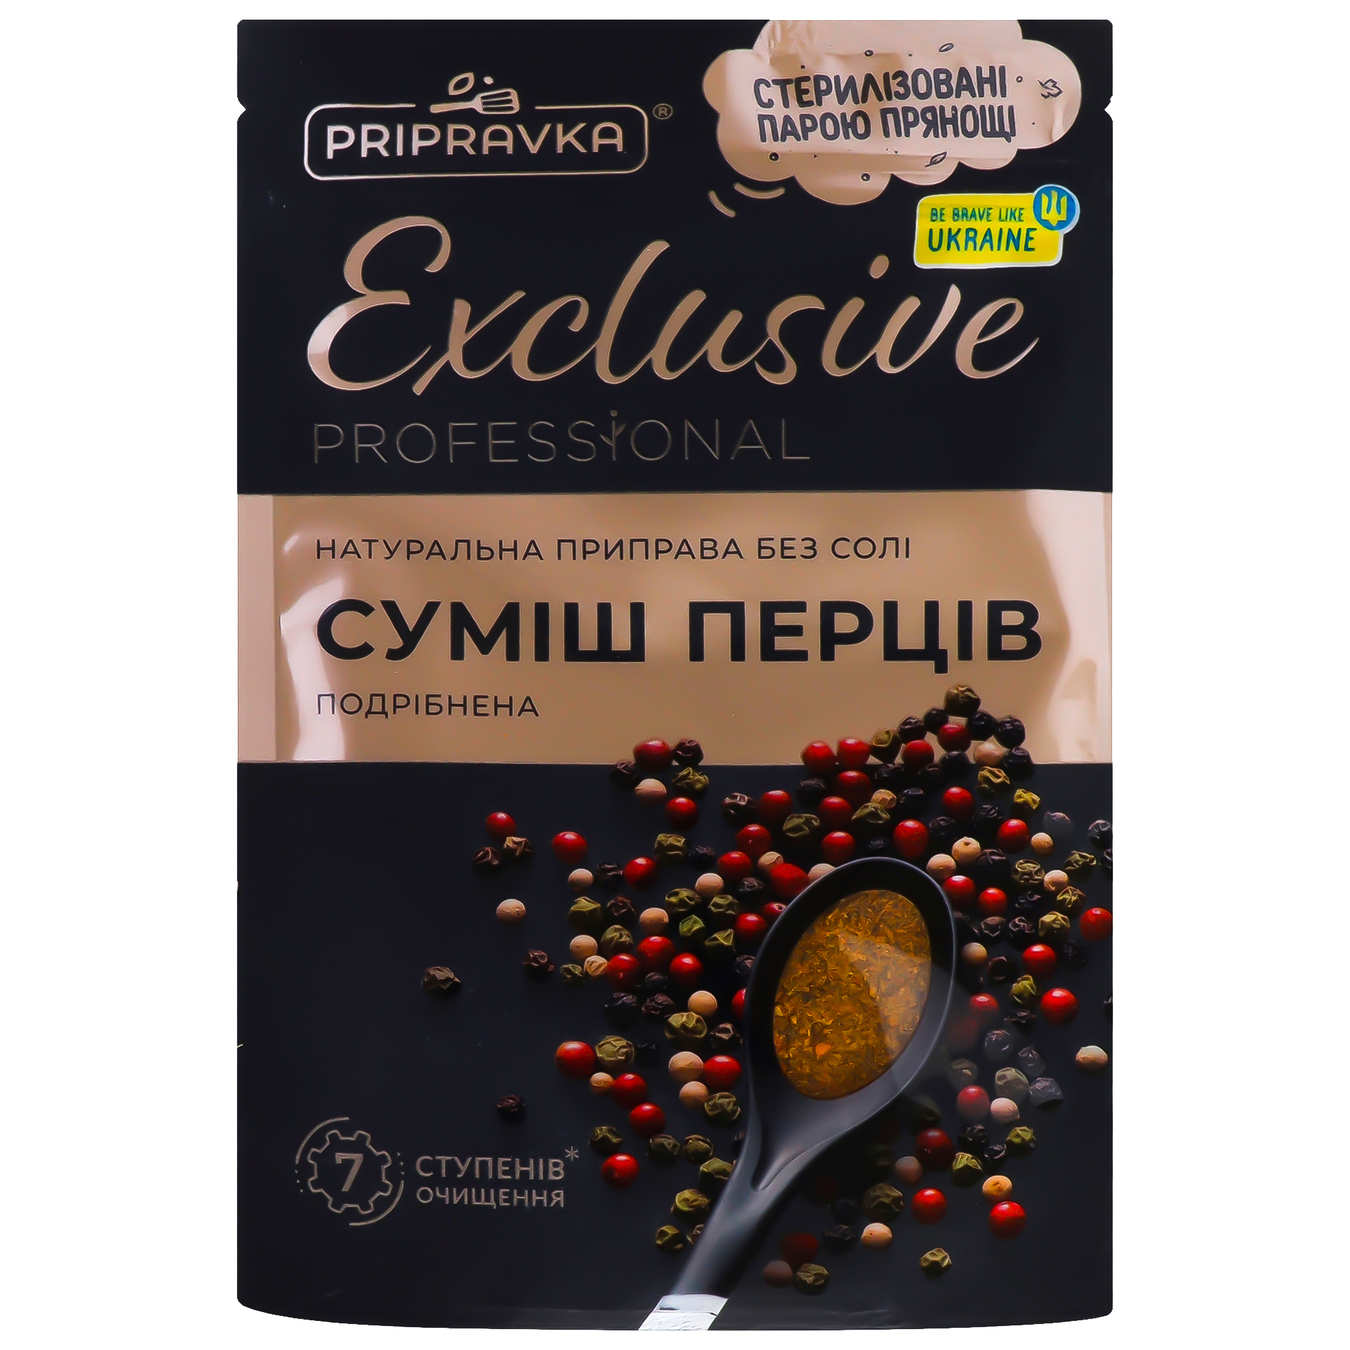 Seasoning Pripravka Exclusive Professional Peppers mix without salt, natural 35g